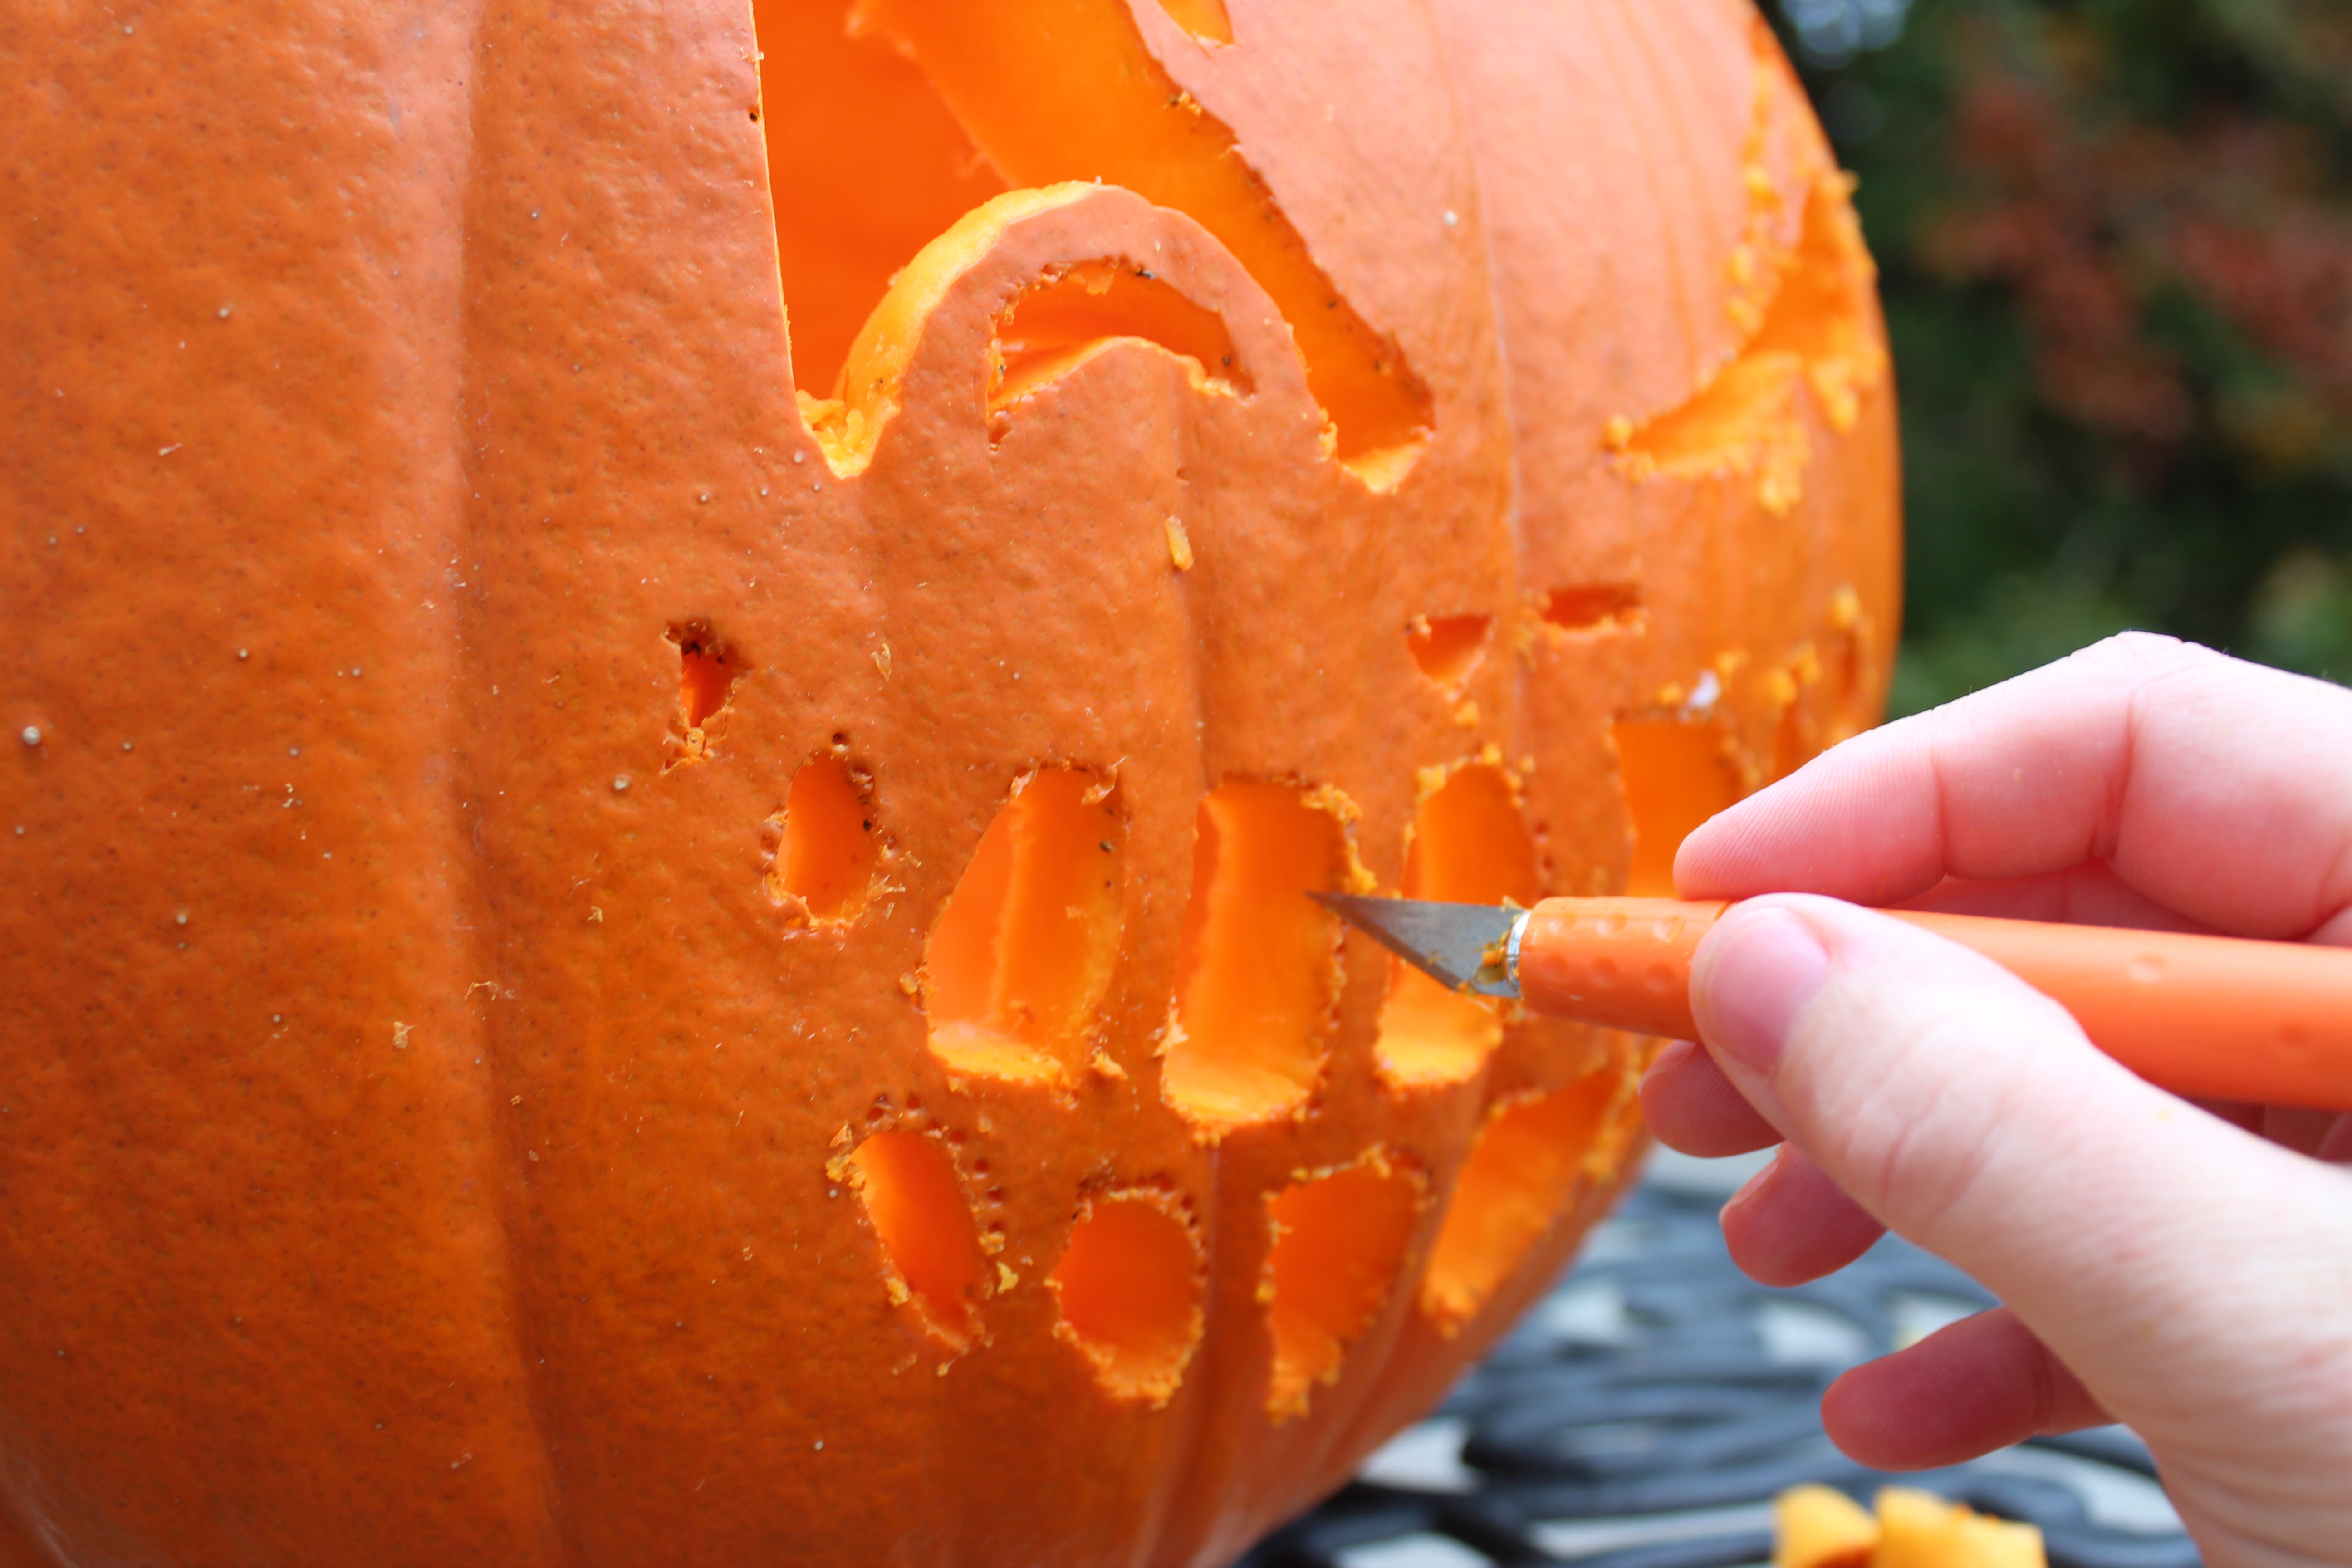 How do you carve a pumpkin? Cut out the face shapes